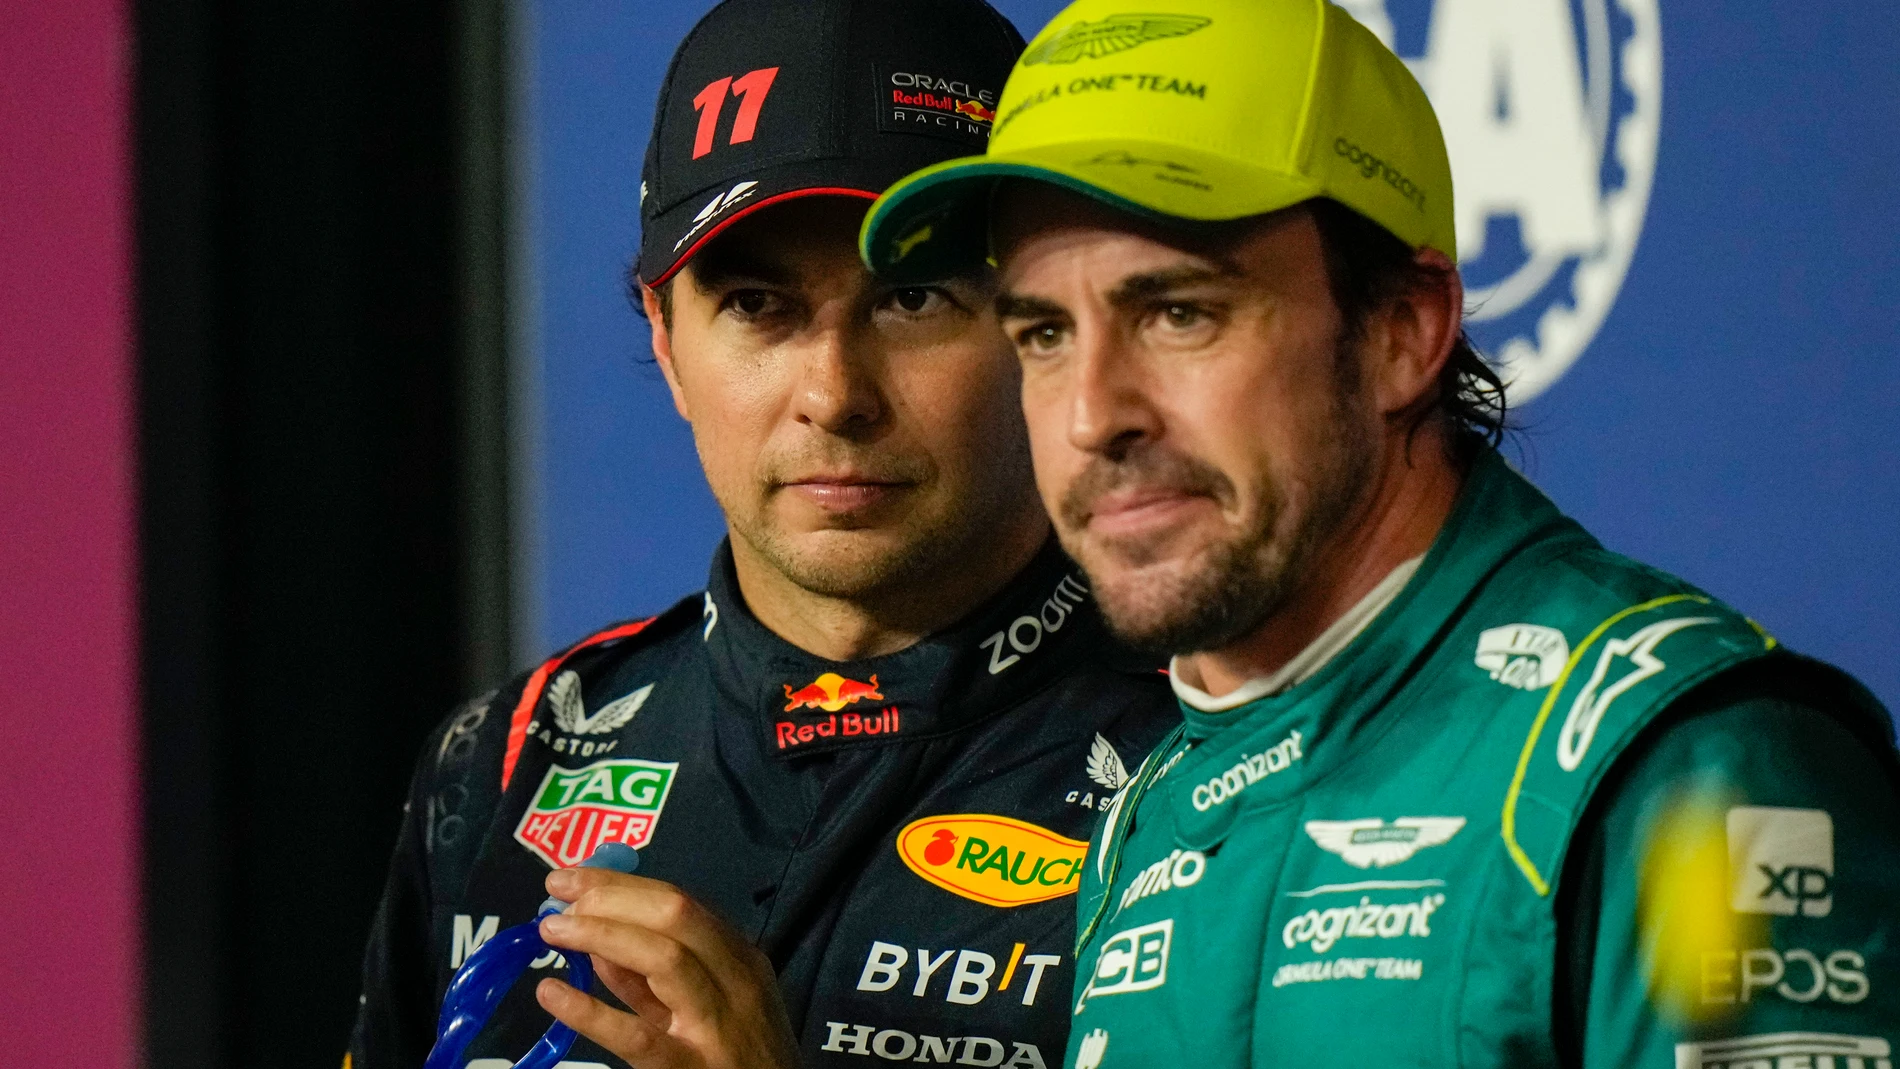 Red Bull driver Sergio Perez of Mexico, left, looks on with Aston Martin driver Fernando Alonso of Spain after the qualifying session ahead of the Formula One Grand Prix at the Jeddah corniche circuit in Jeddah, Saudi Arabia, Saturday, March 18, 2023. Sergio Perez stepped up for Red Bull to ensure the team started from the pole at the Saudi Arabian Grand Prix after a mechanical issue sidelined two-time defending world champion Max Verstappen. (AP Photo/Luca Bruno)